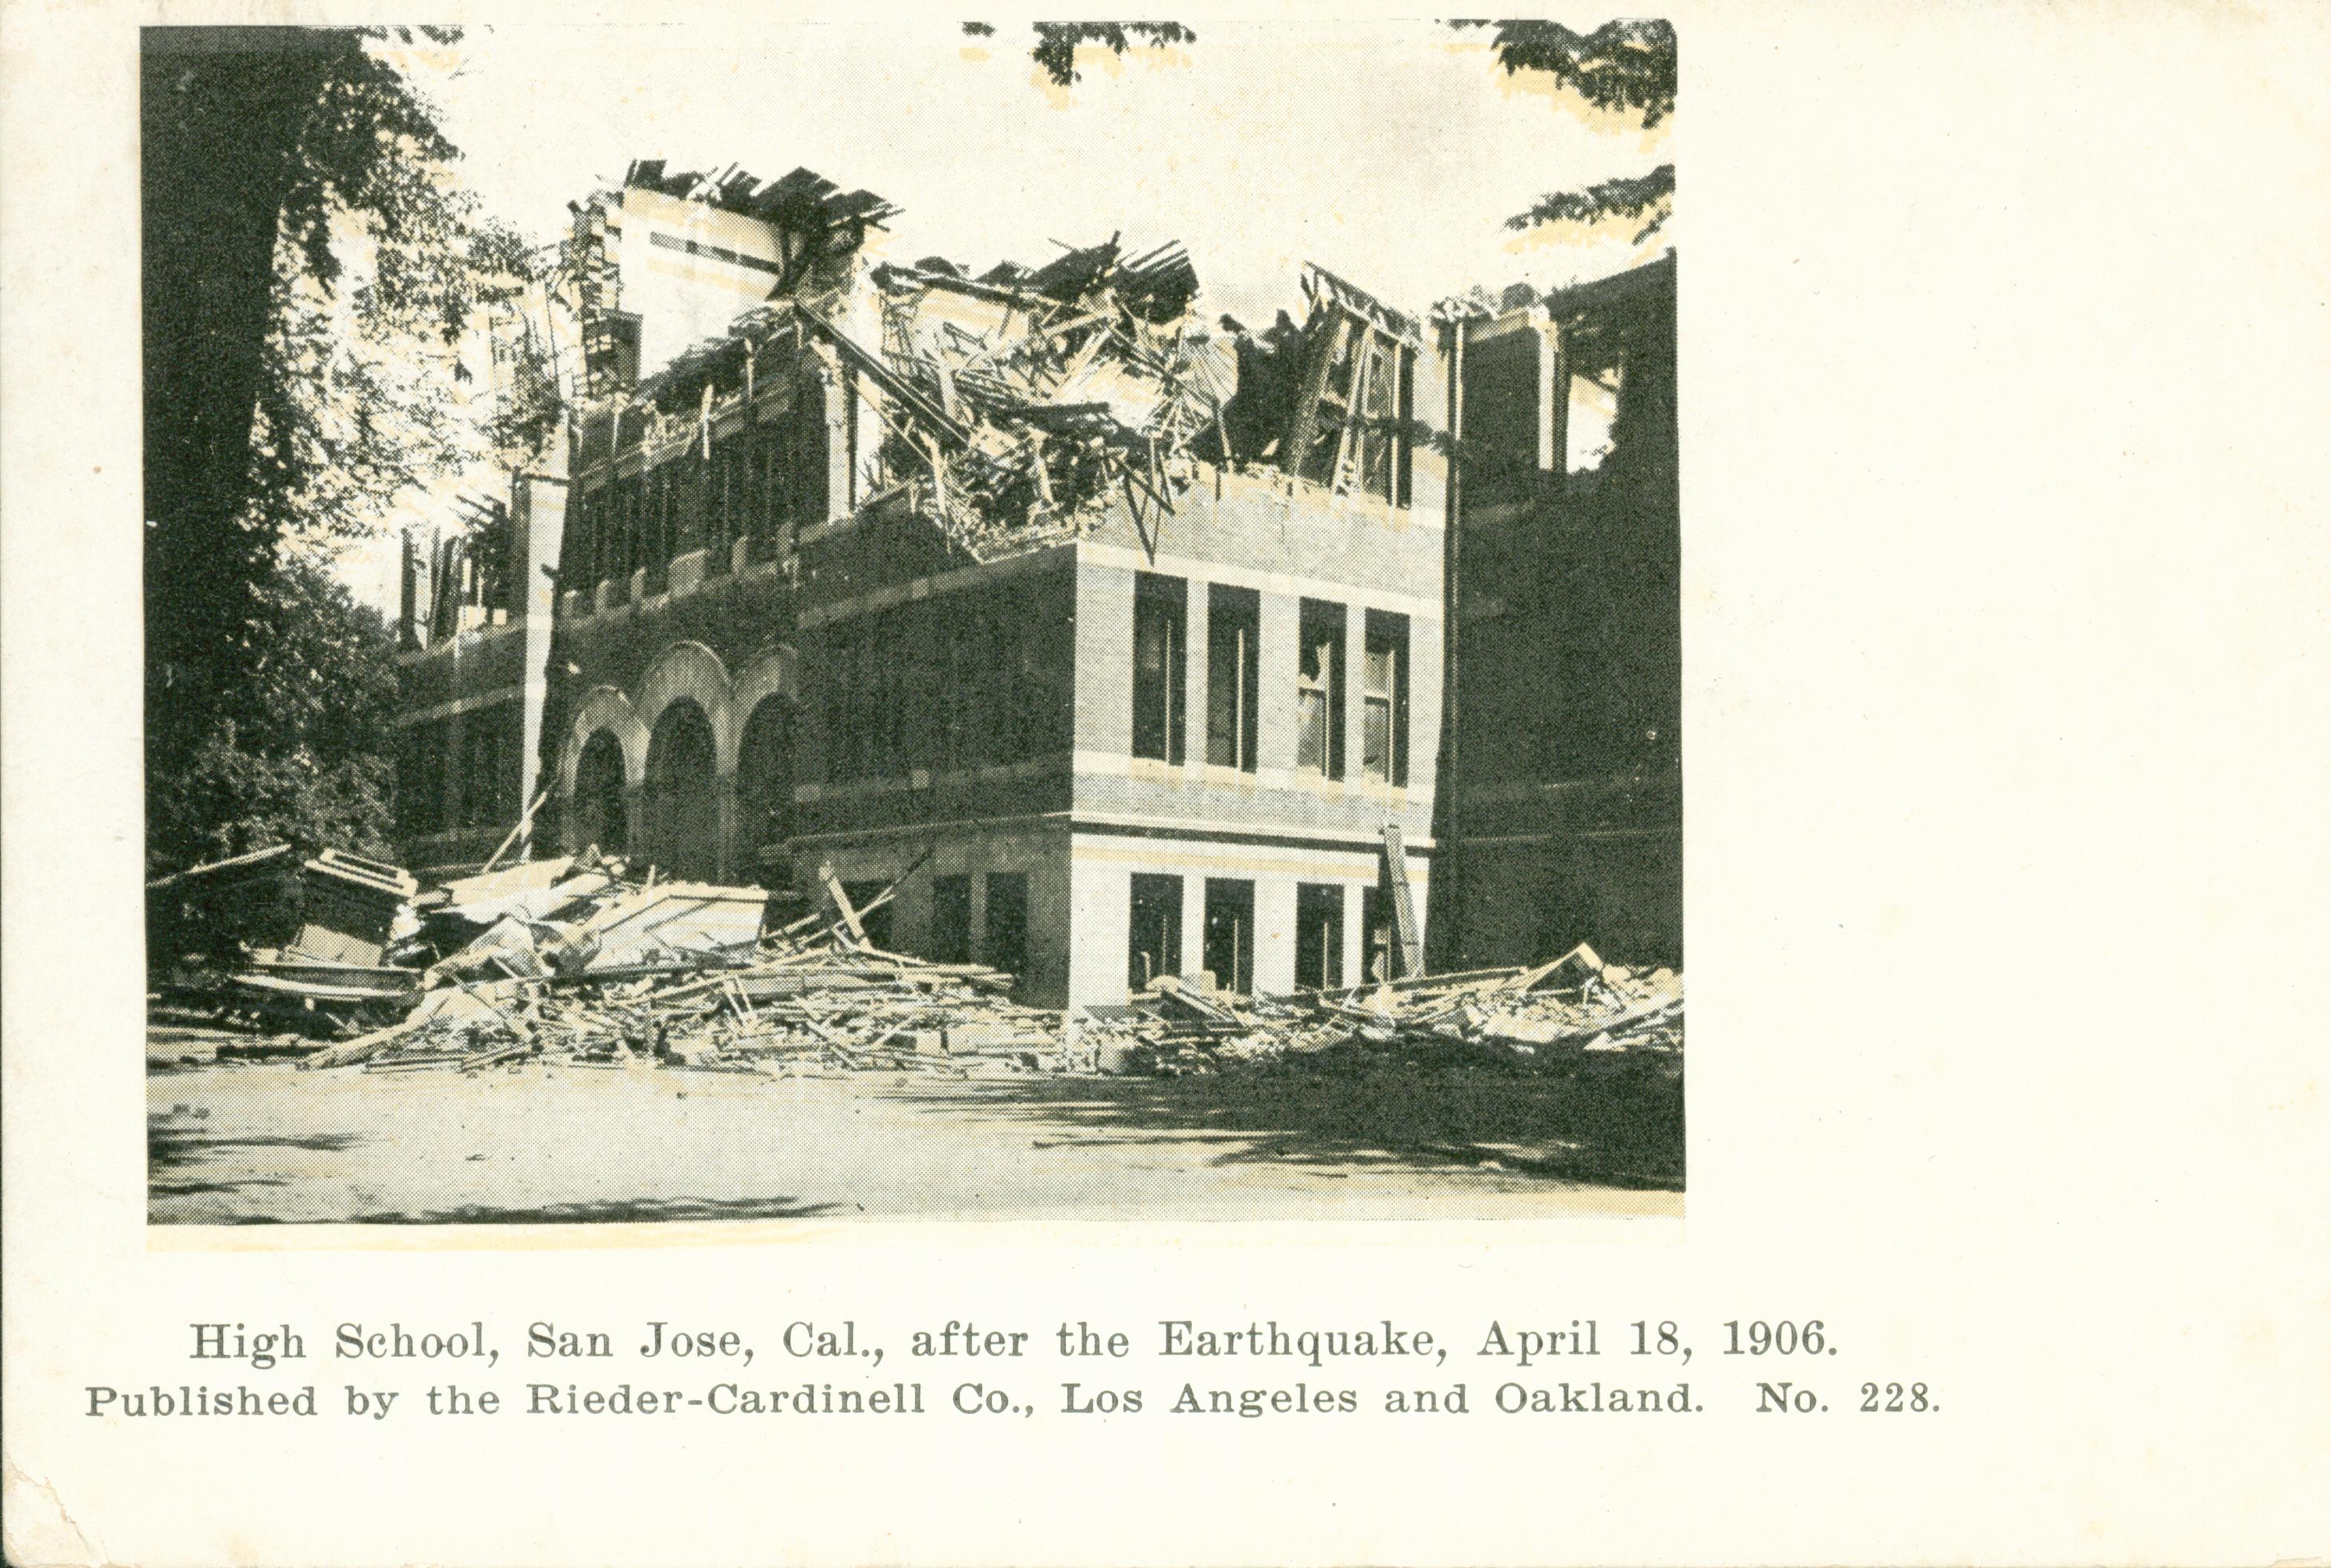 Exterior view of high school after the destructive April 18, 1906 earthquake